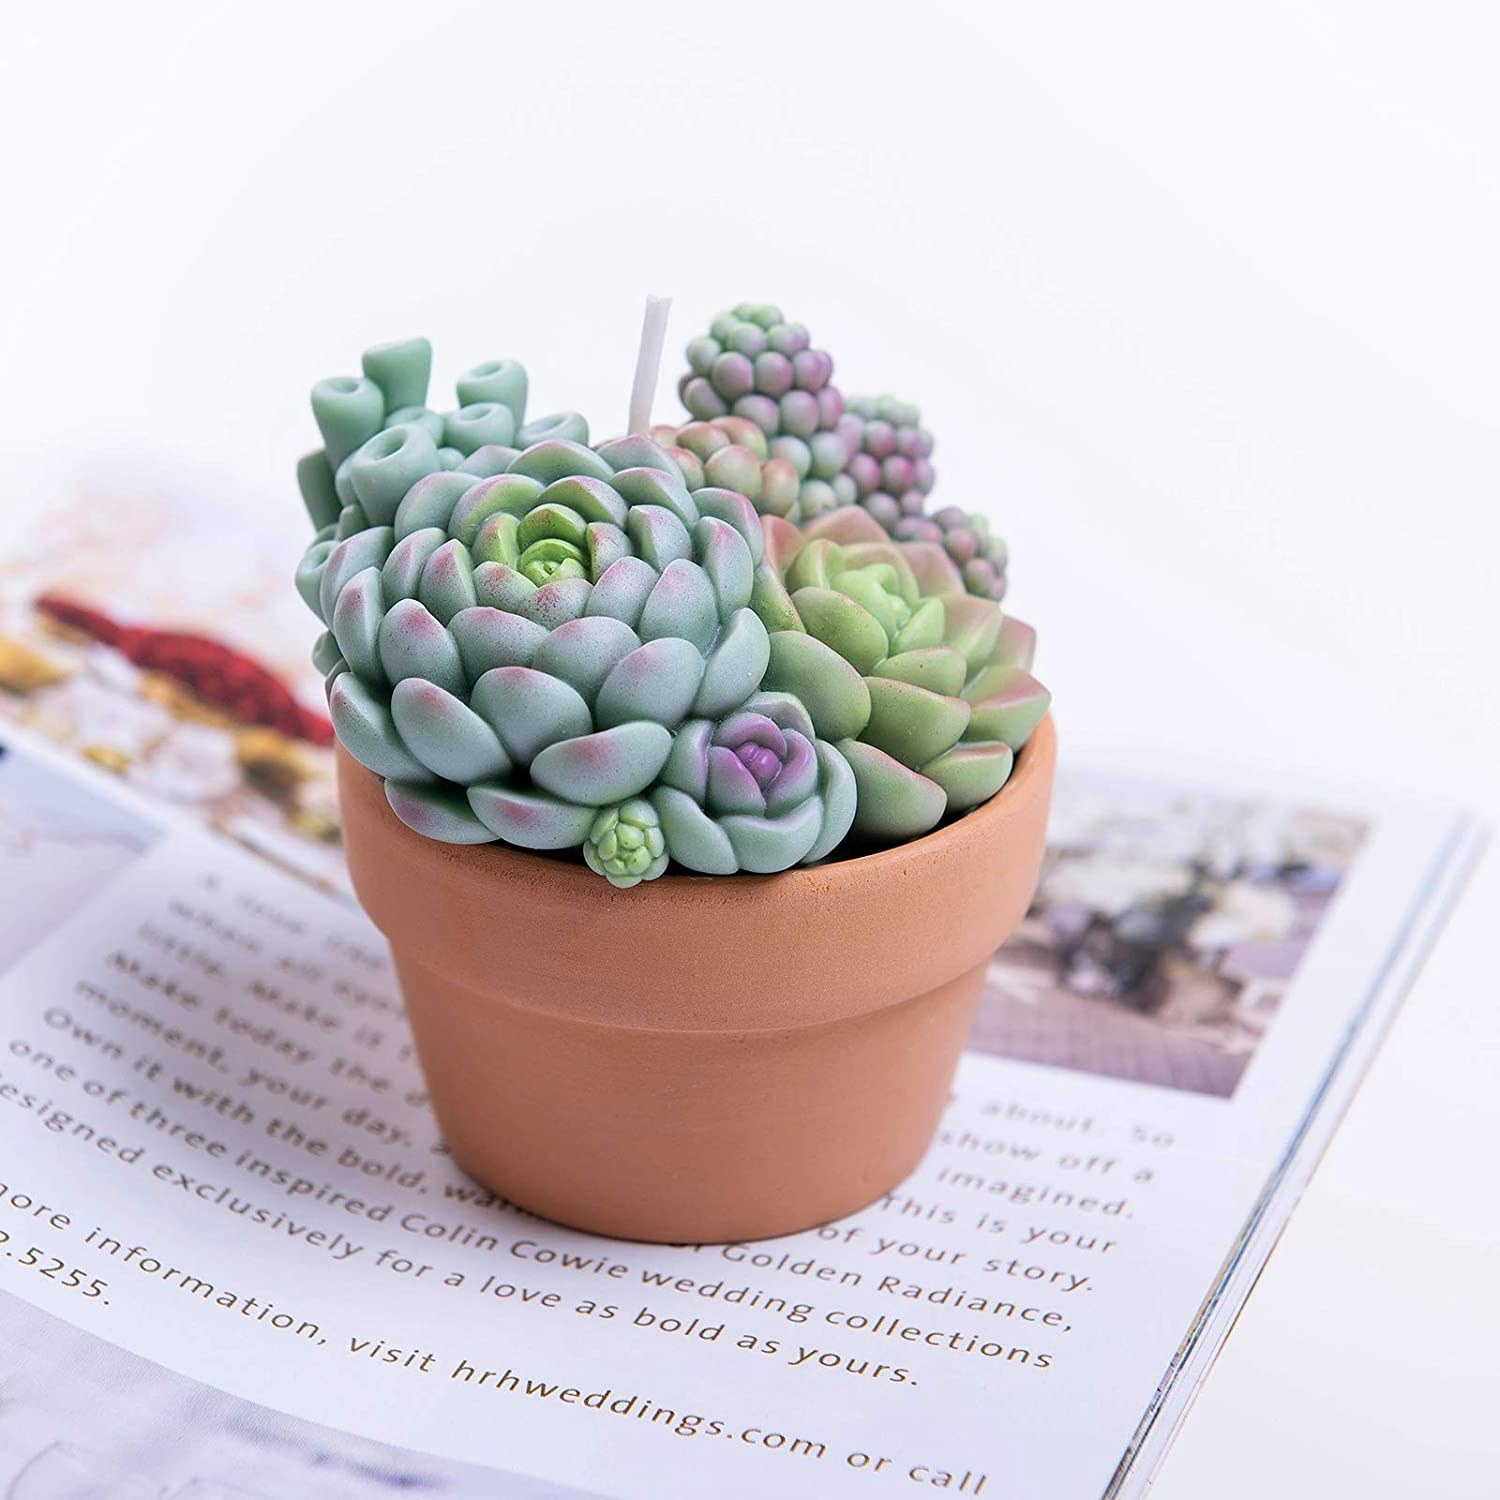 candle that looks like succulents in a planter